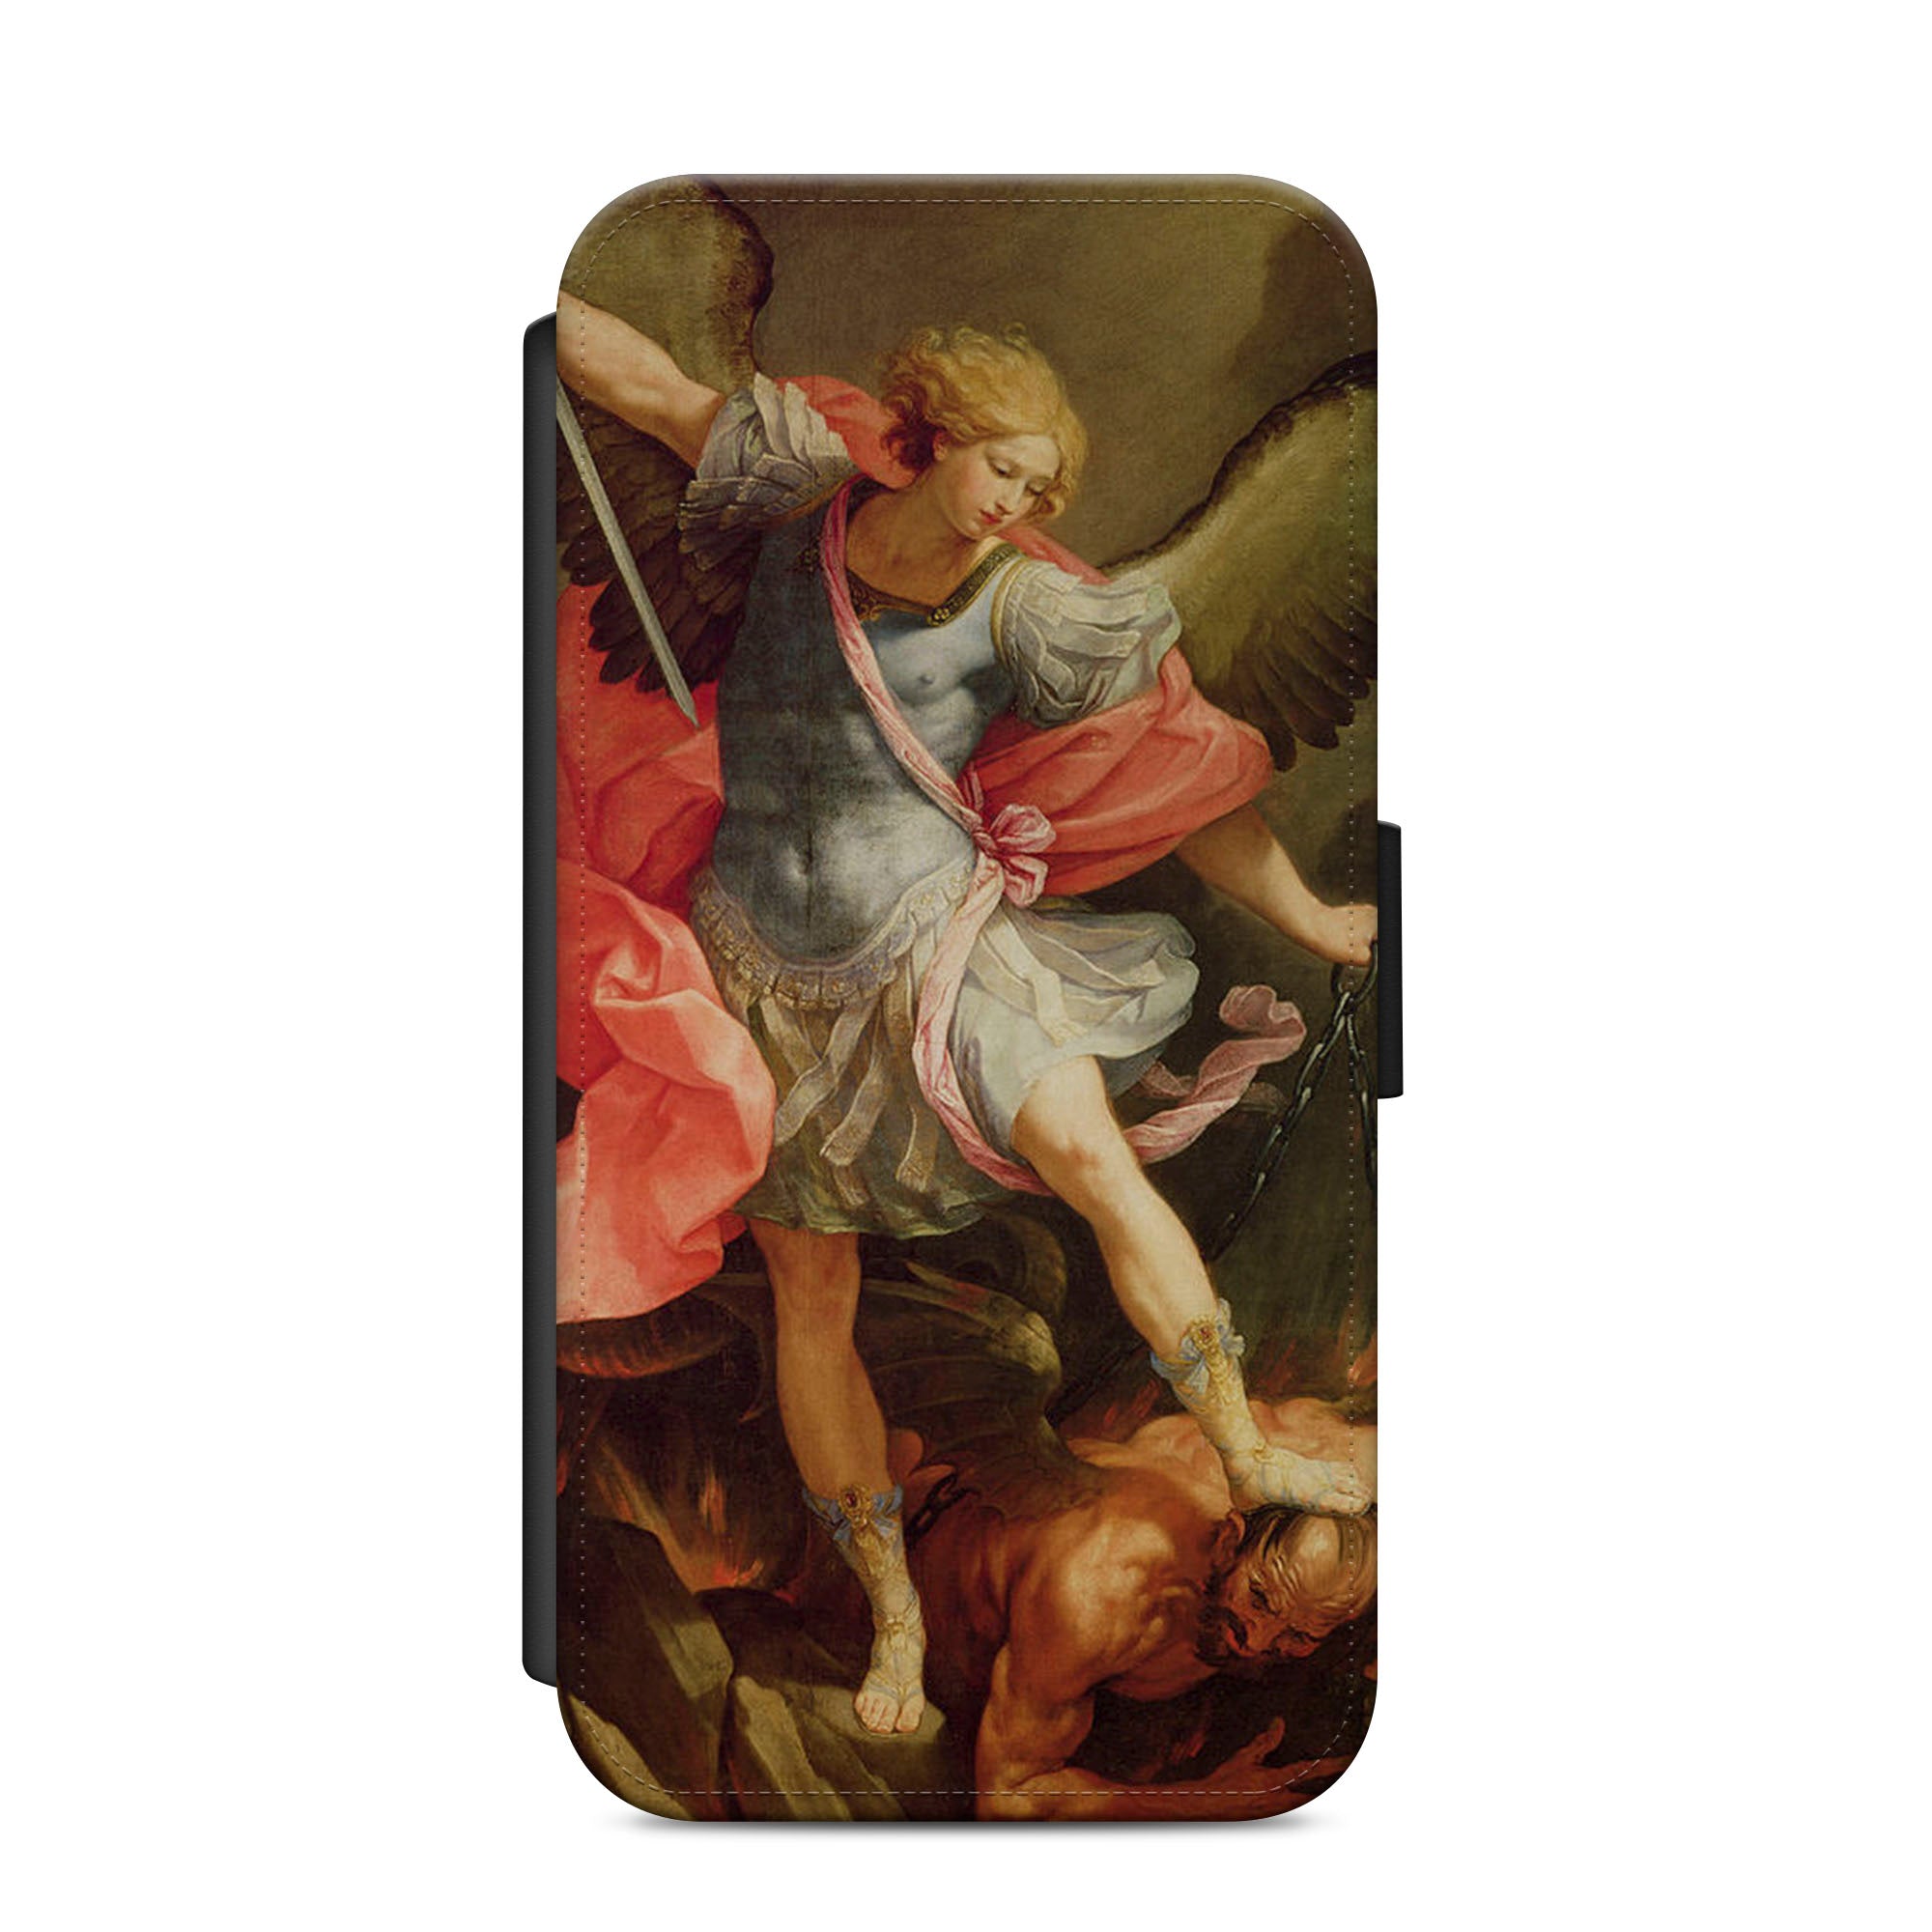 St. Michael The Archangel Faux Leather Flip Case Wallet for iPhone / Samsung